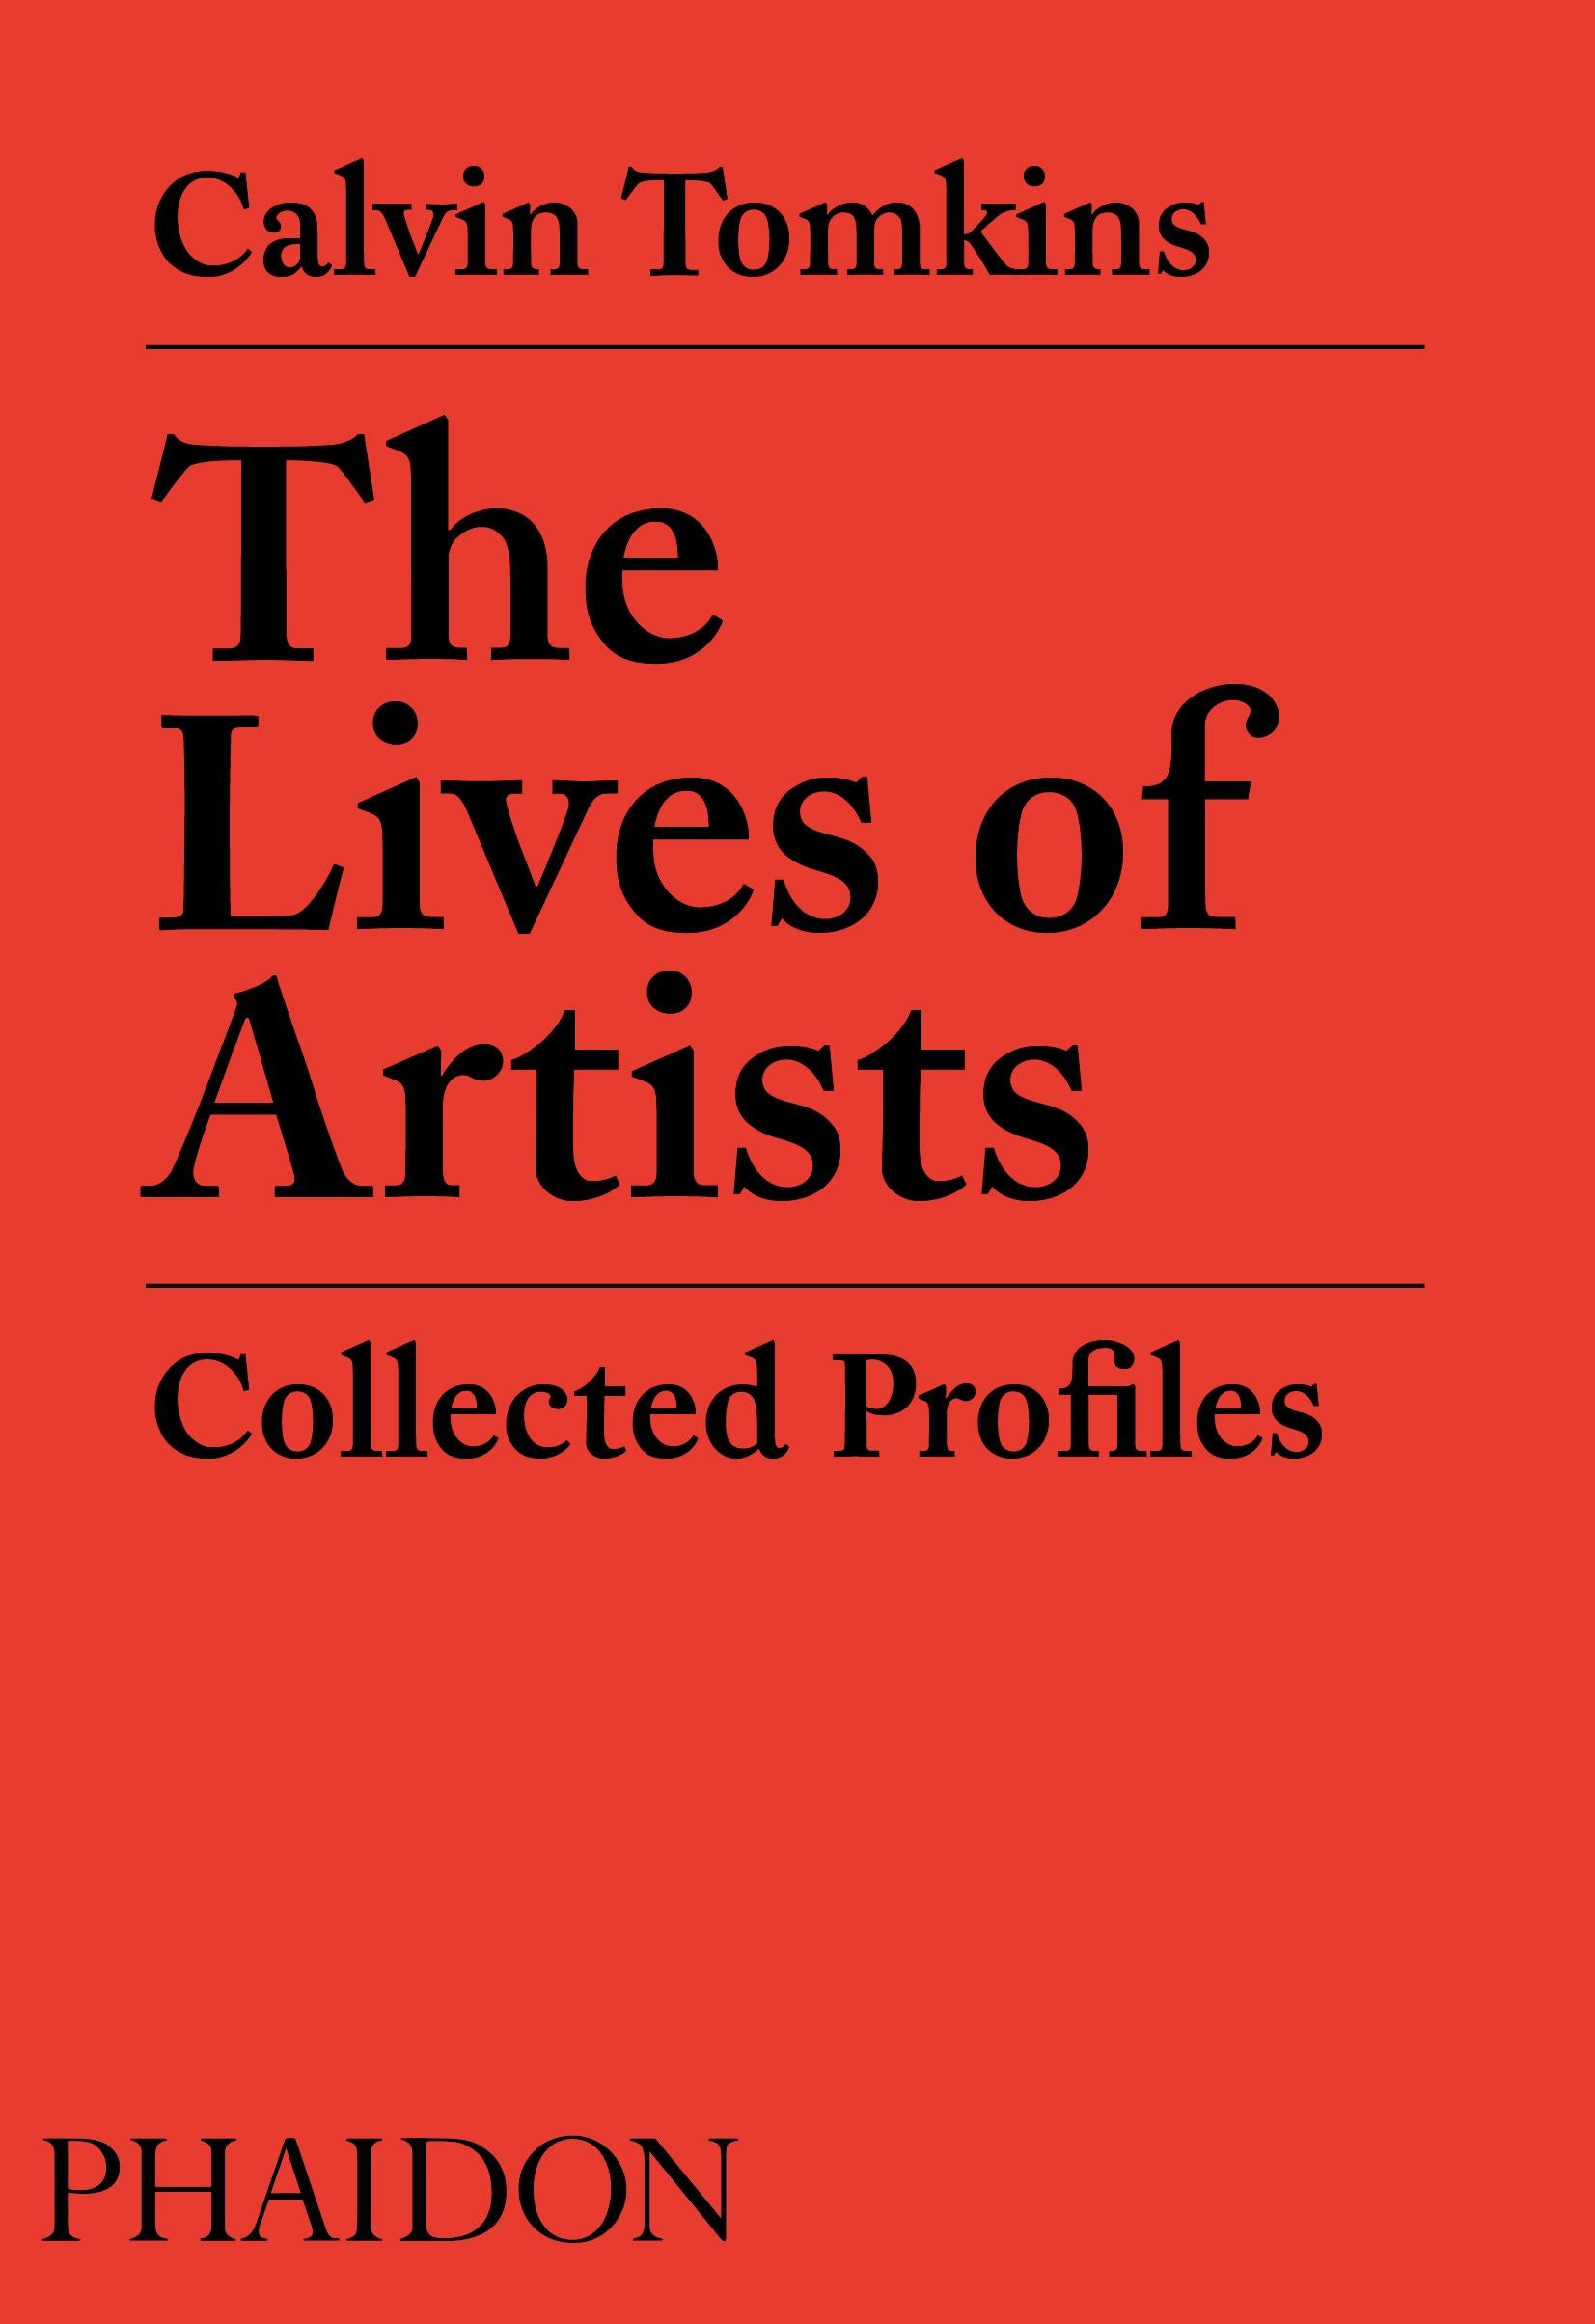 Contemporary The Lives of Artists Collected Profiles by Calvin Tomkins For Sale